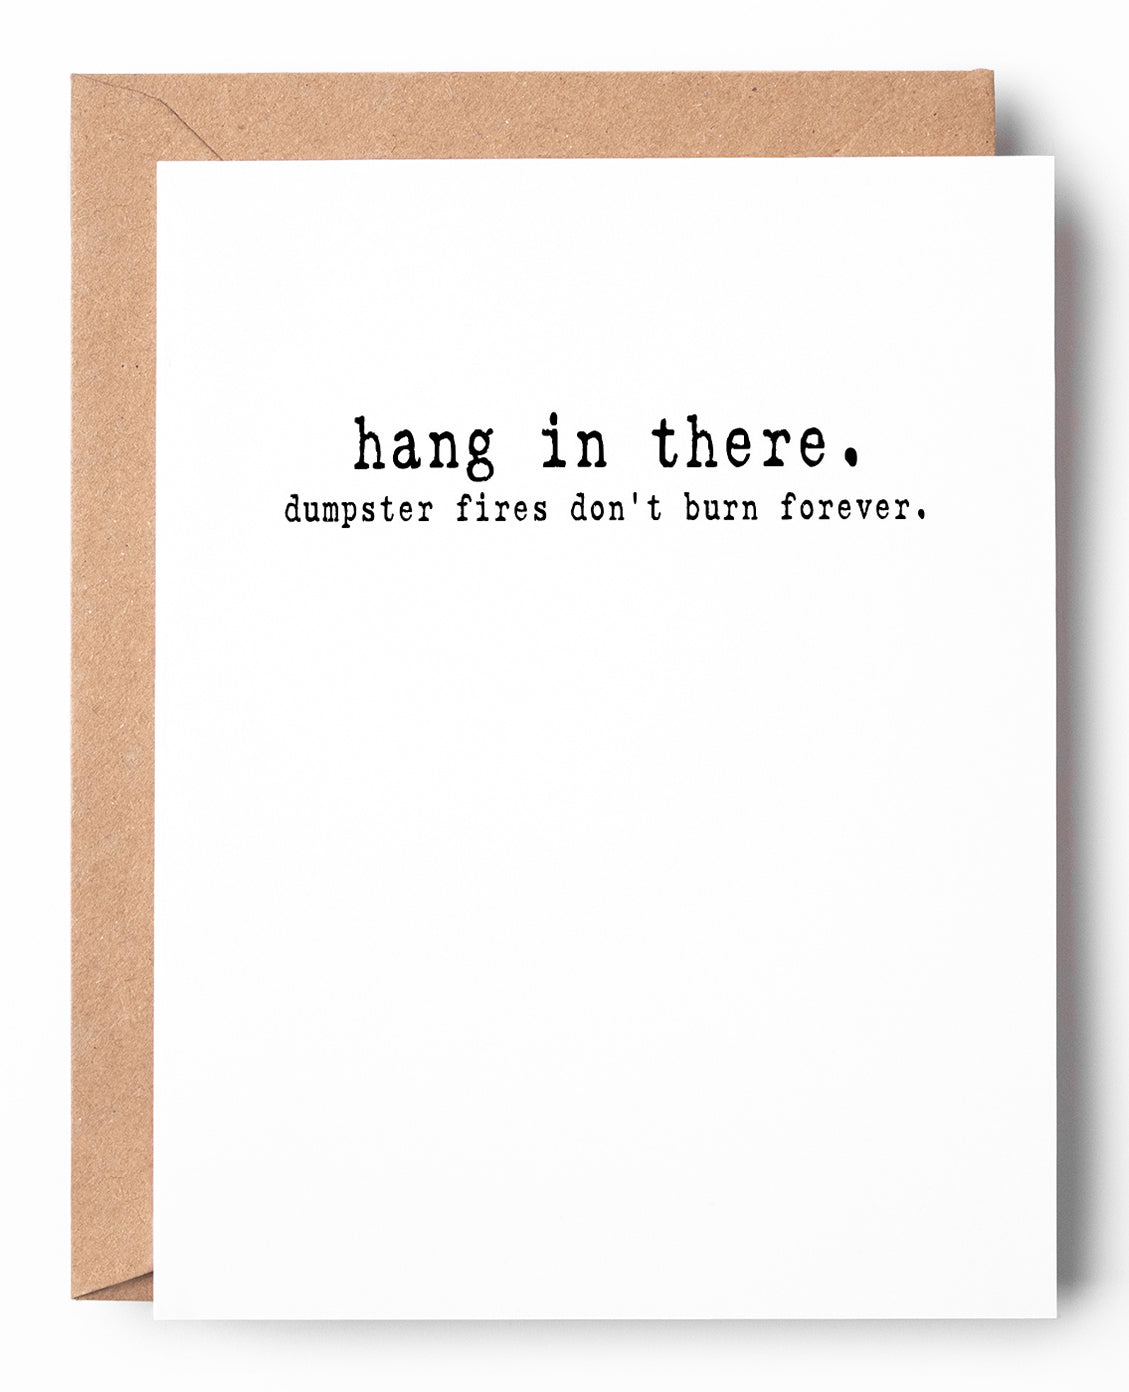 Funny letterpress encouragement card that says: Hang in there. Dumpster fires dont burn forever.